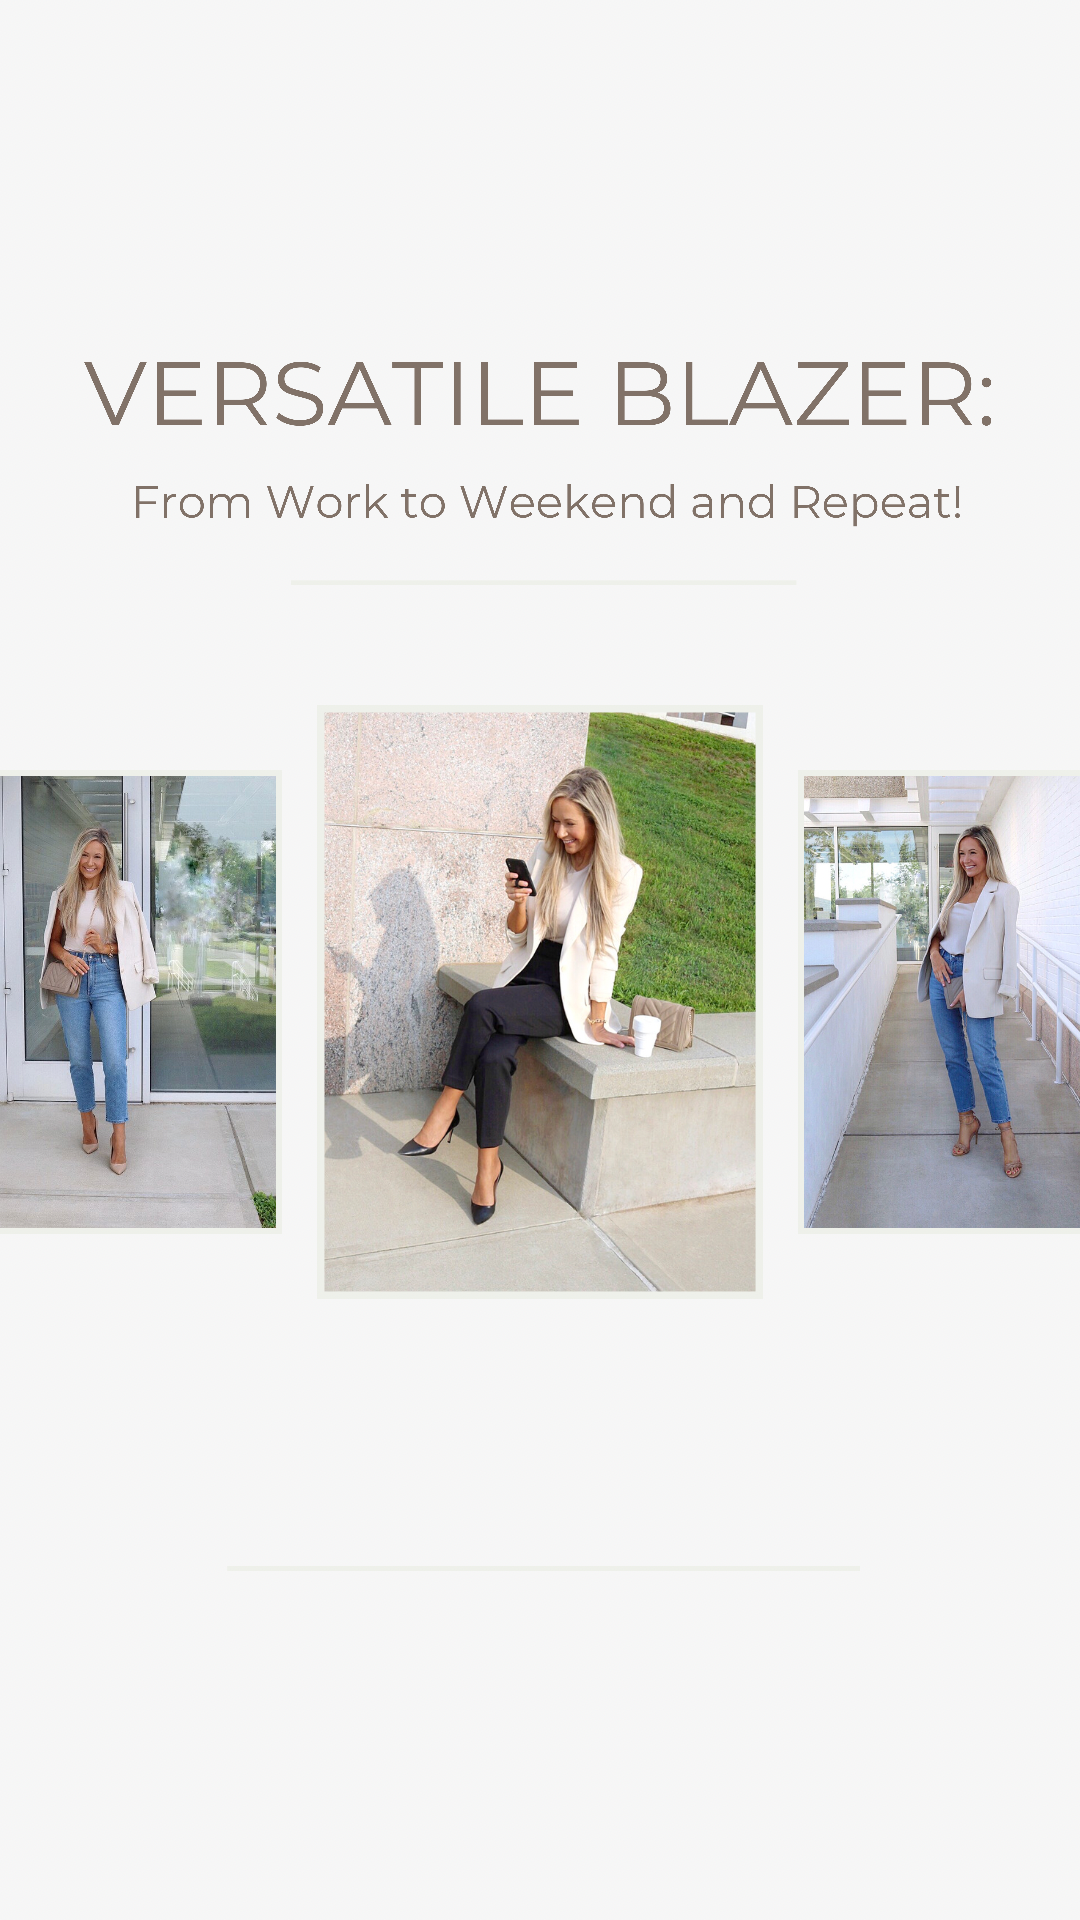 Versatile Blazer: From Work to Weekend and Repeat!